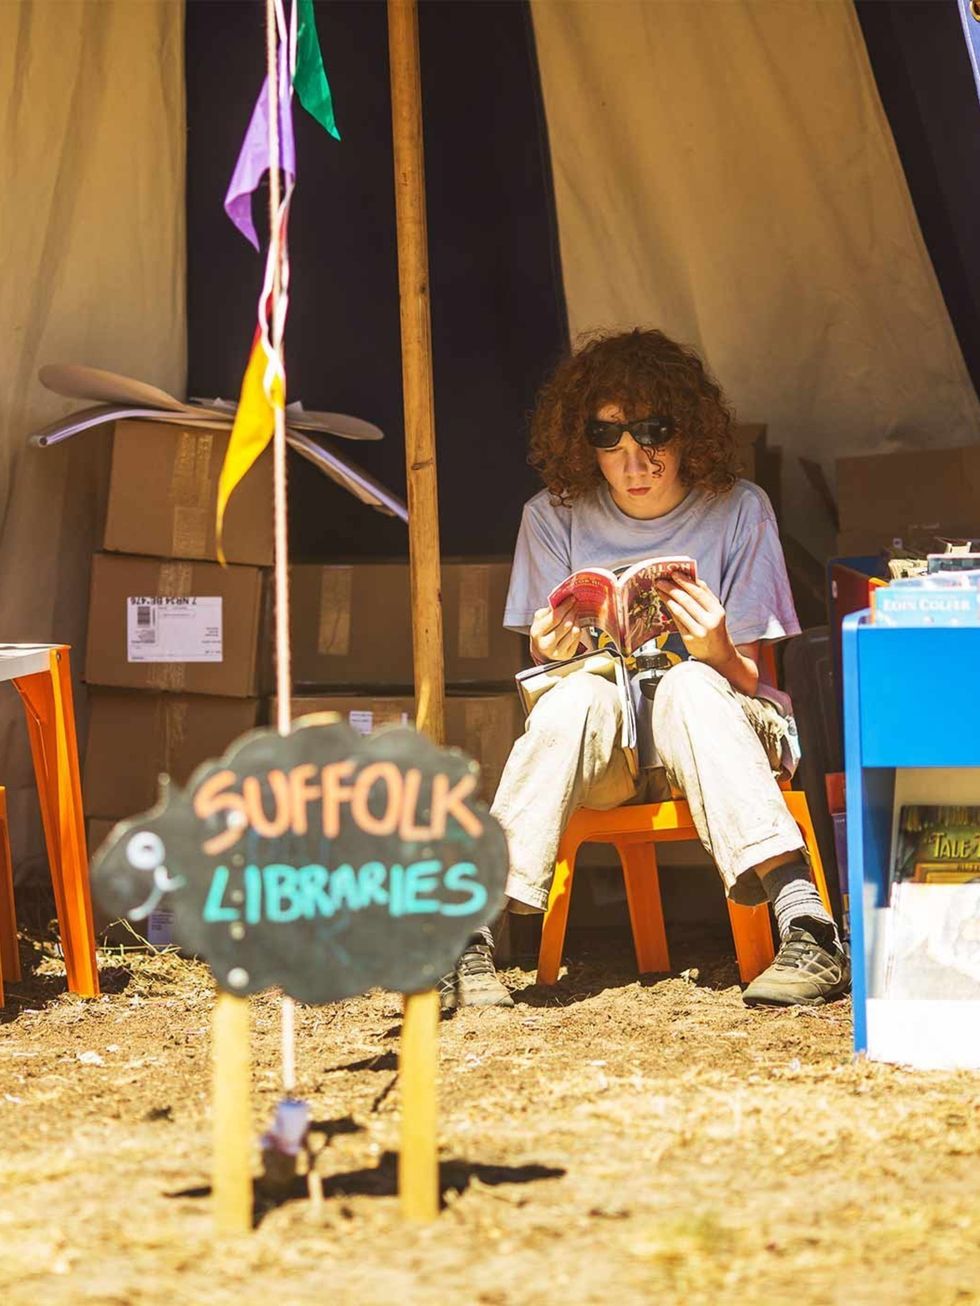 &lt;p&gt;&lt;strong&gt;Latitude Festival&lt;/strong&gt;&lt;/p&gt;&lt;p&gt;If you feel like travelling to greener climes to satisfy your lit urges, look no further than Suffolk&rsquo;s Latitude Festival.&lt;/p&gt;&lt;p&gt;Predominantly known for it&rsquo;s